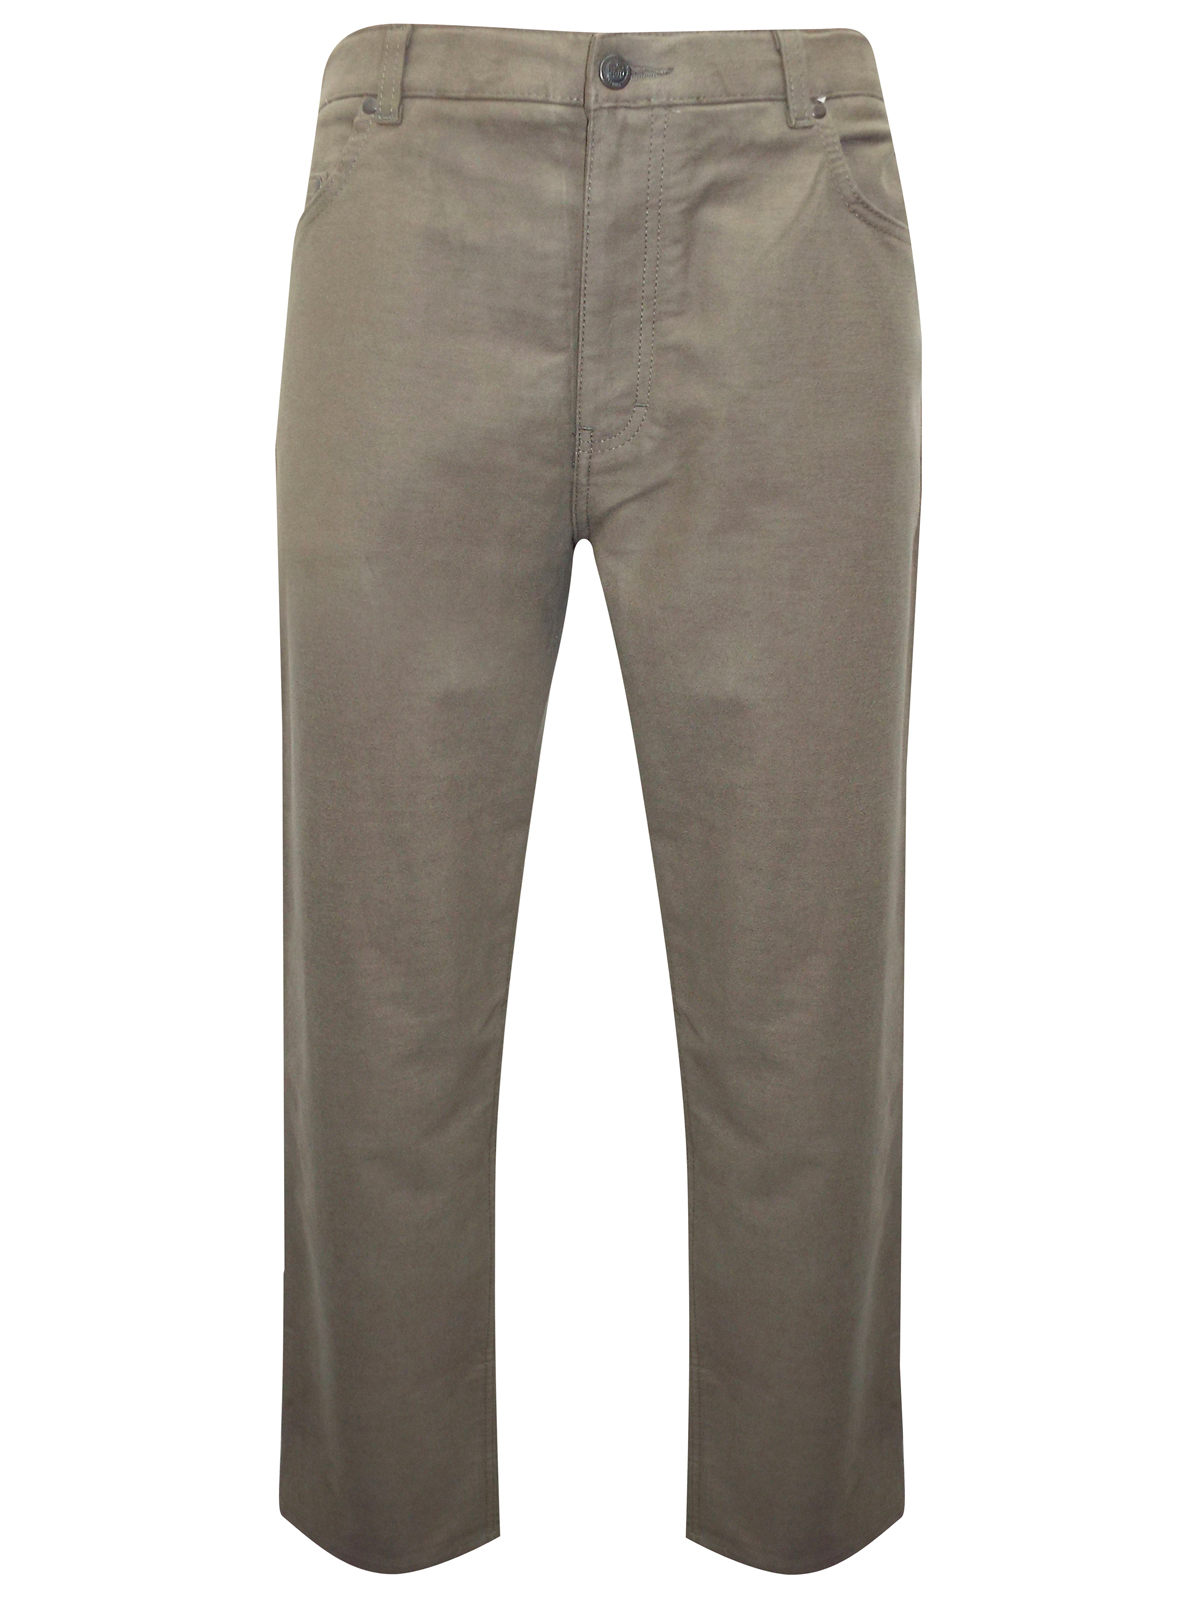 Marks and Spencer - - M&5 LIGHT-BROWN Regular Fit Chinos with Stormwear ...